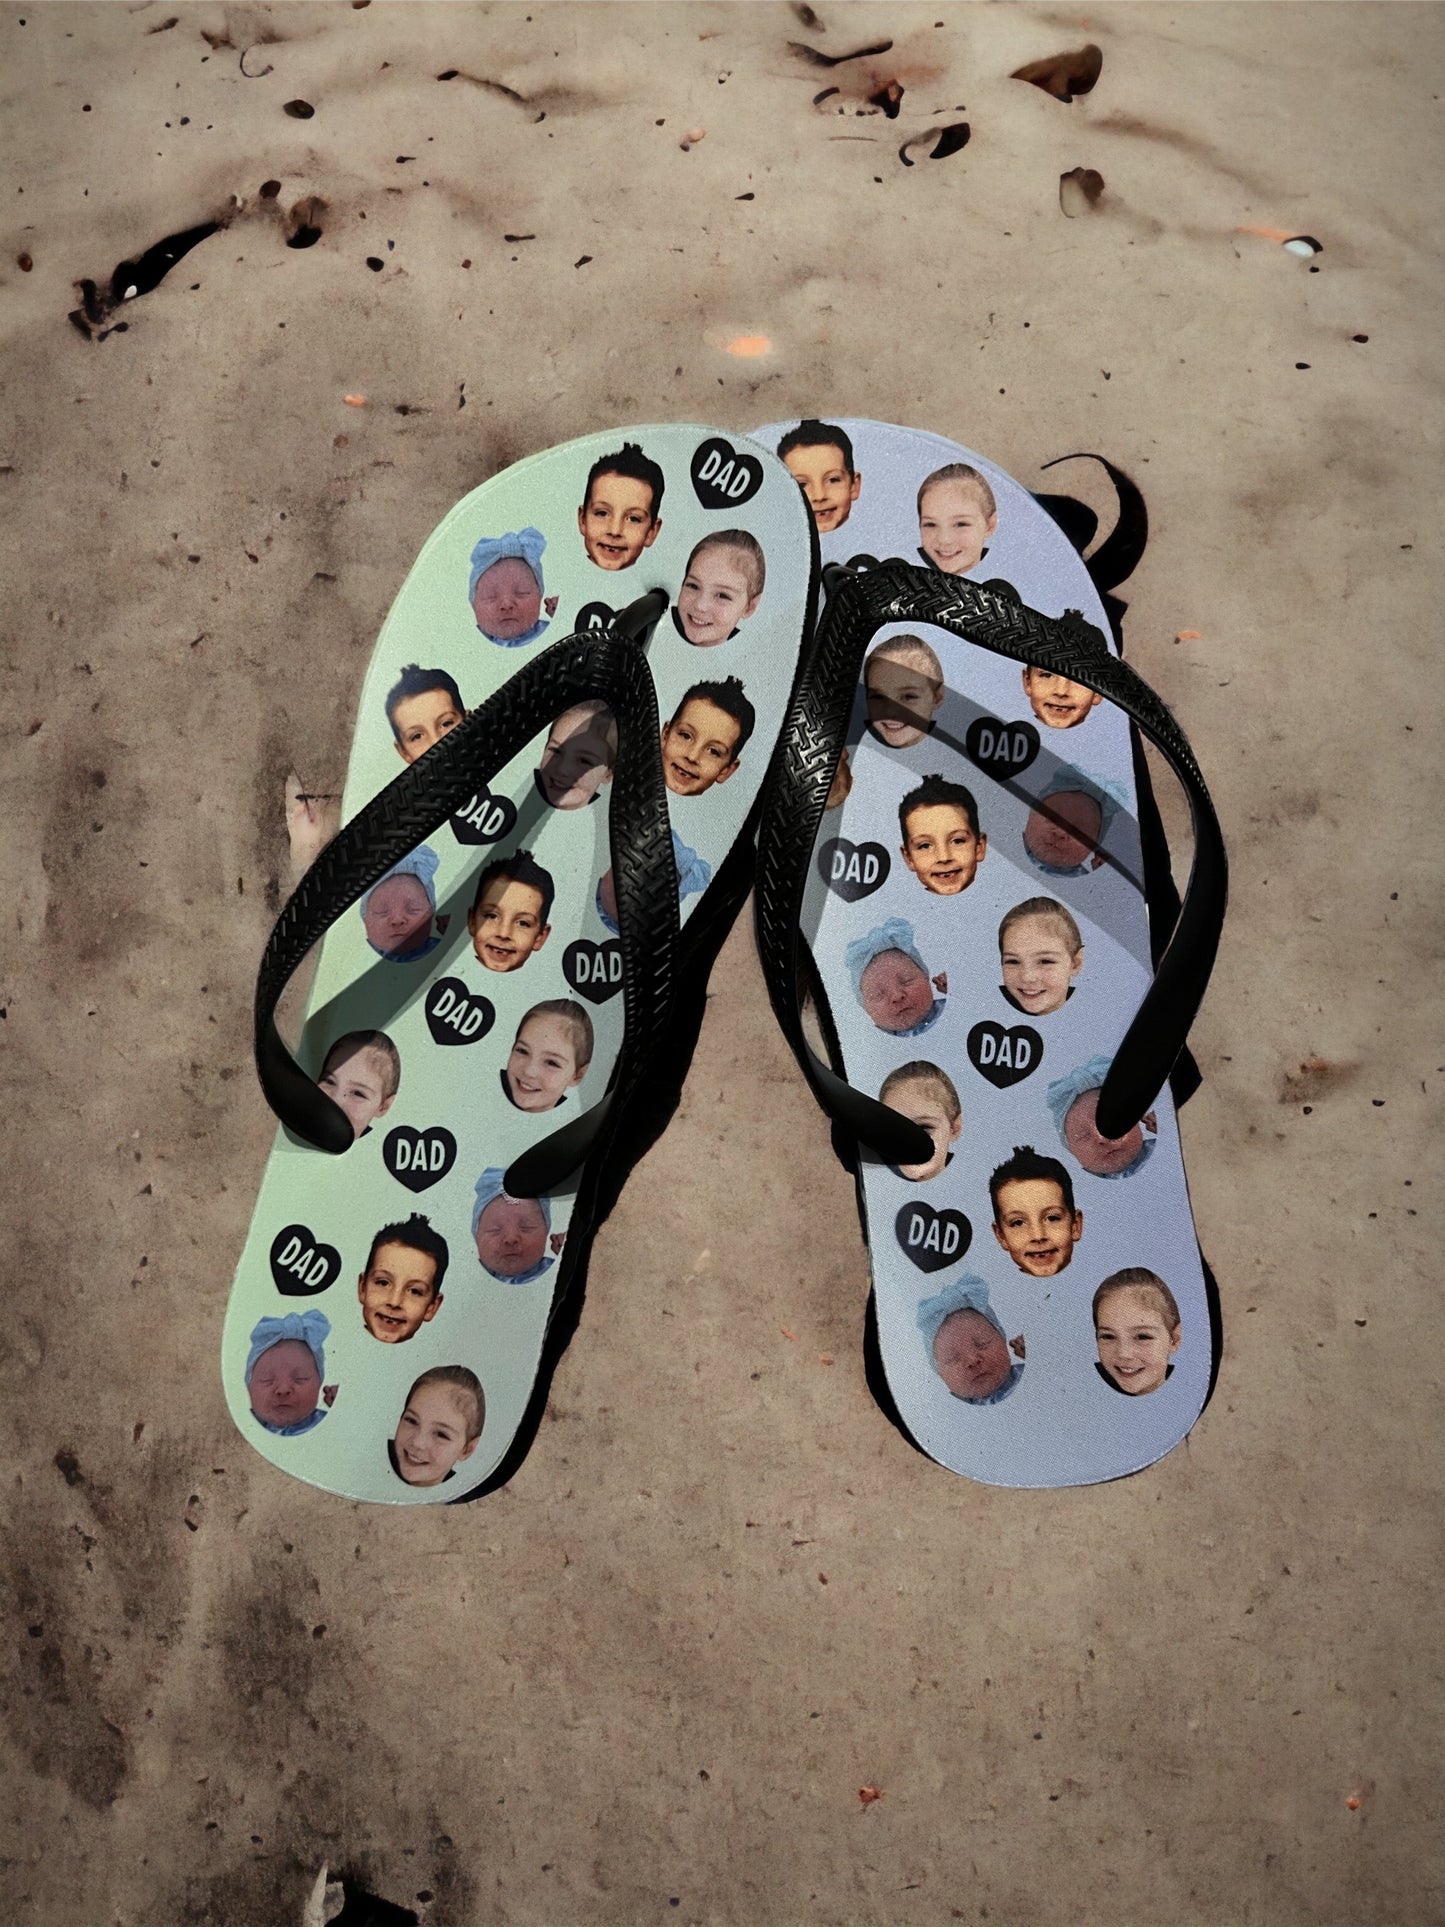 Adult face thongs